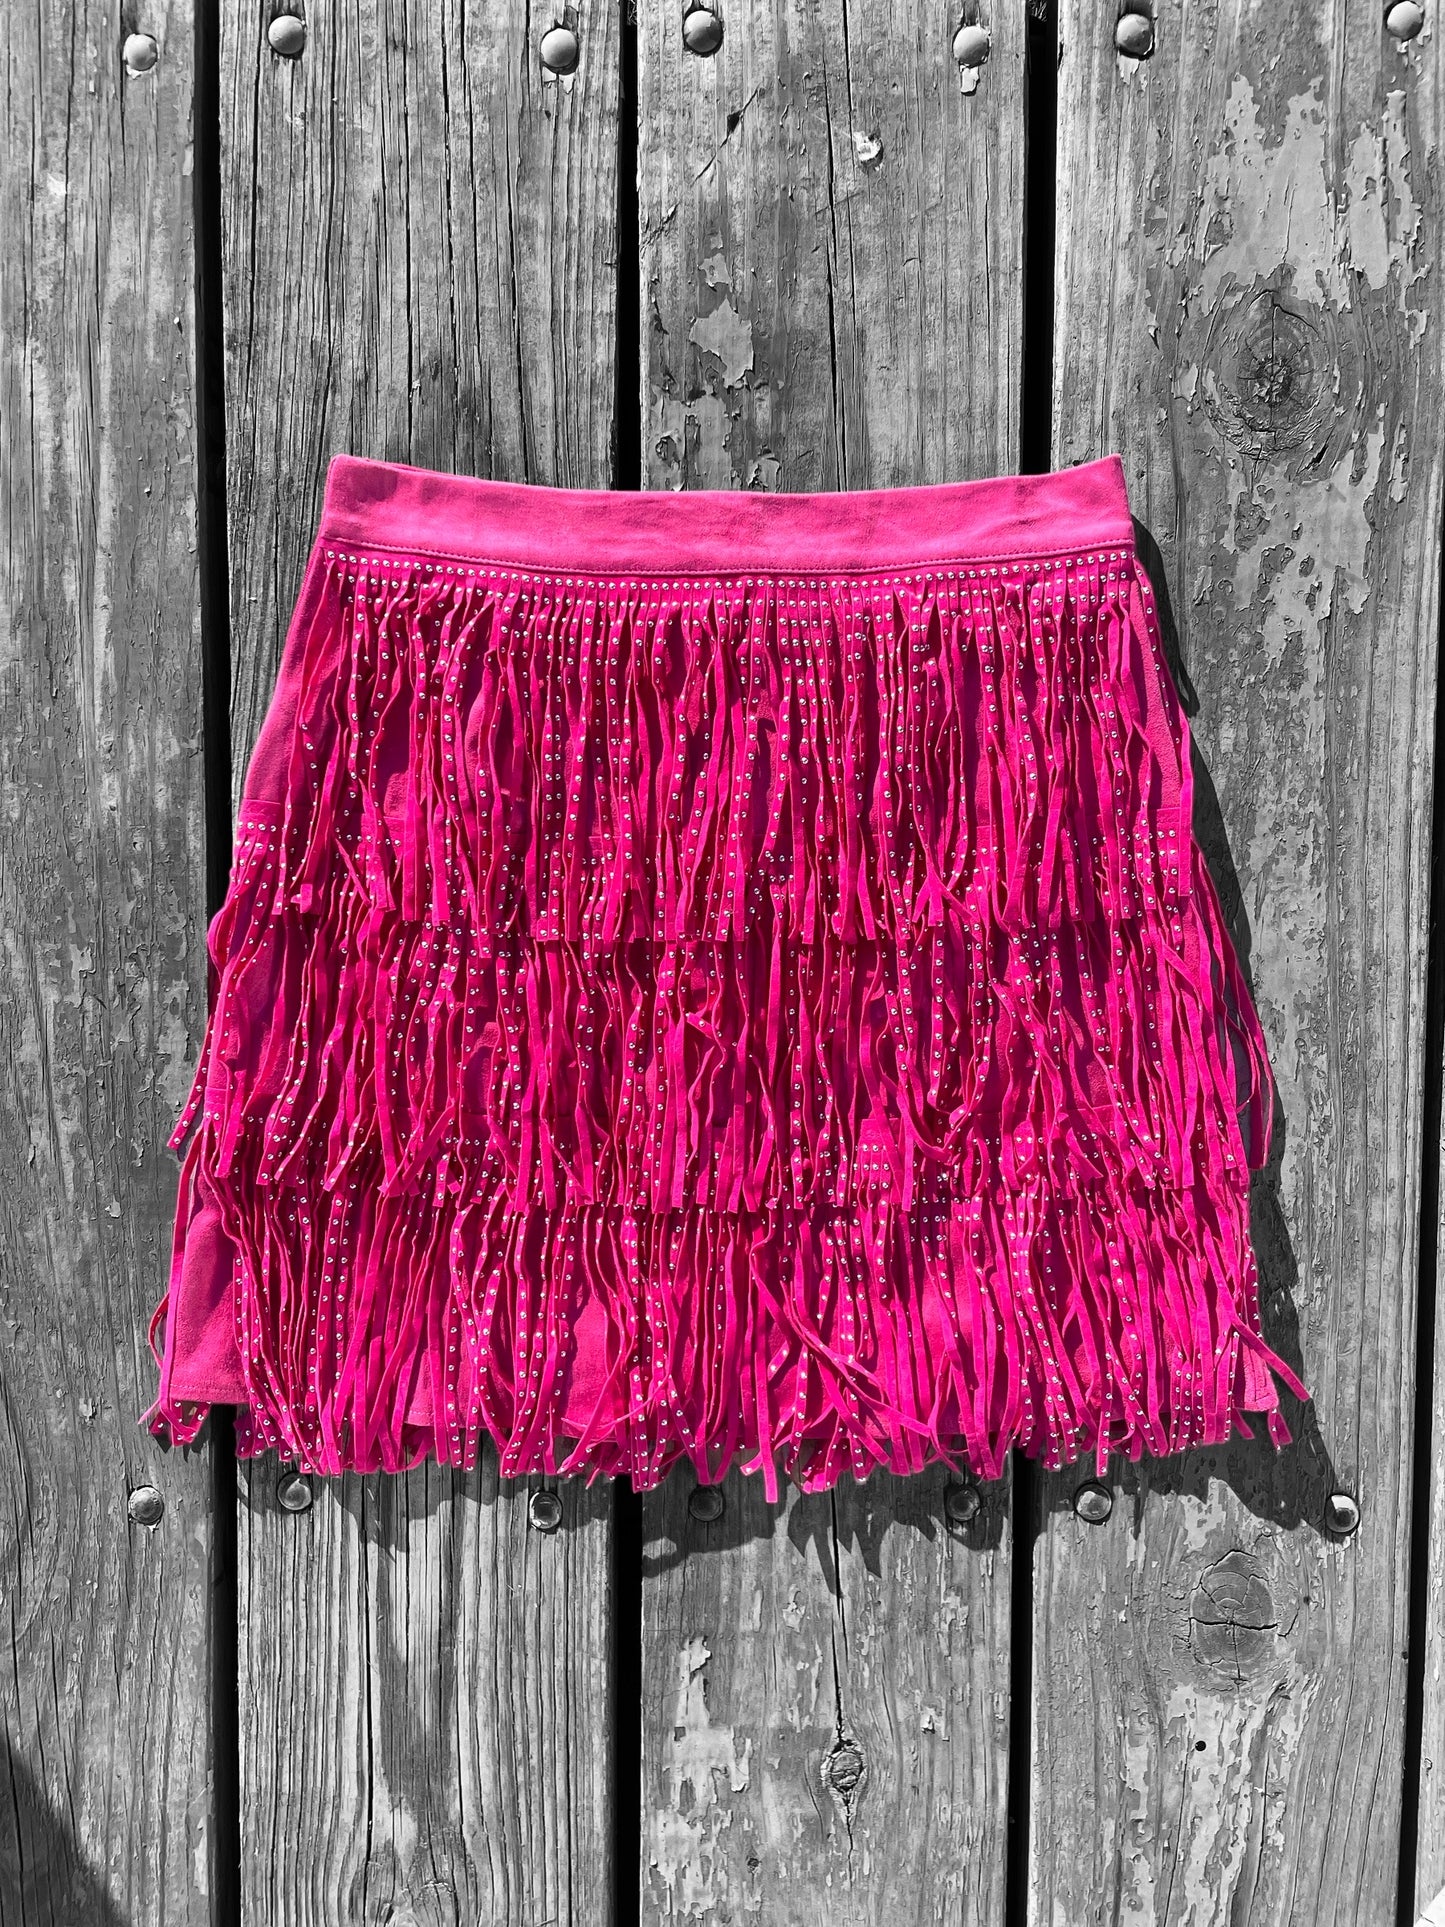 The “Pink Penelope” Skirt